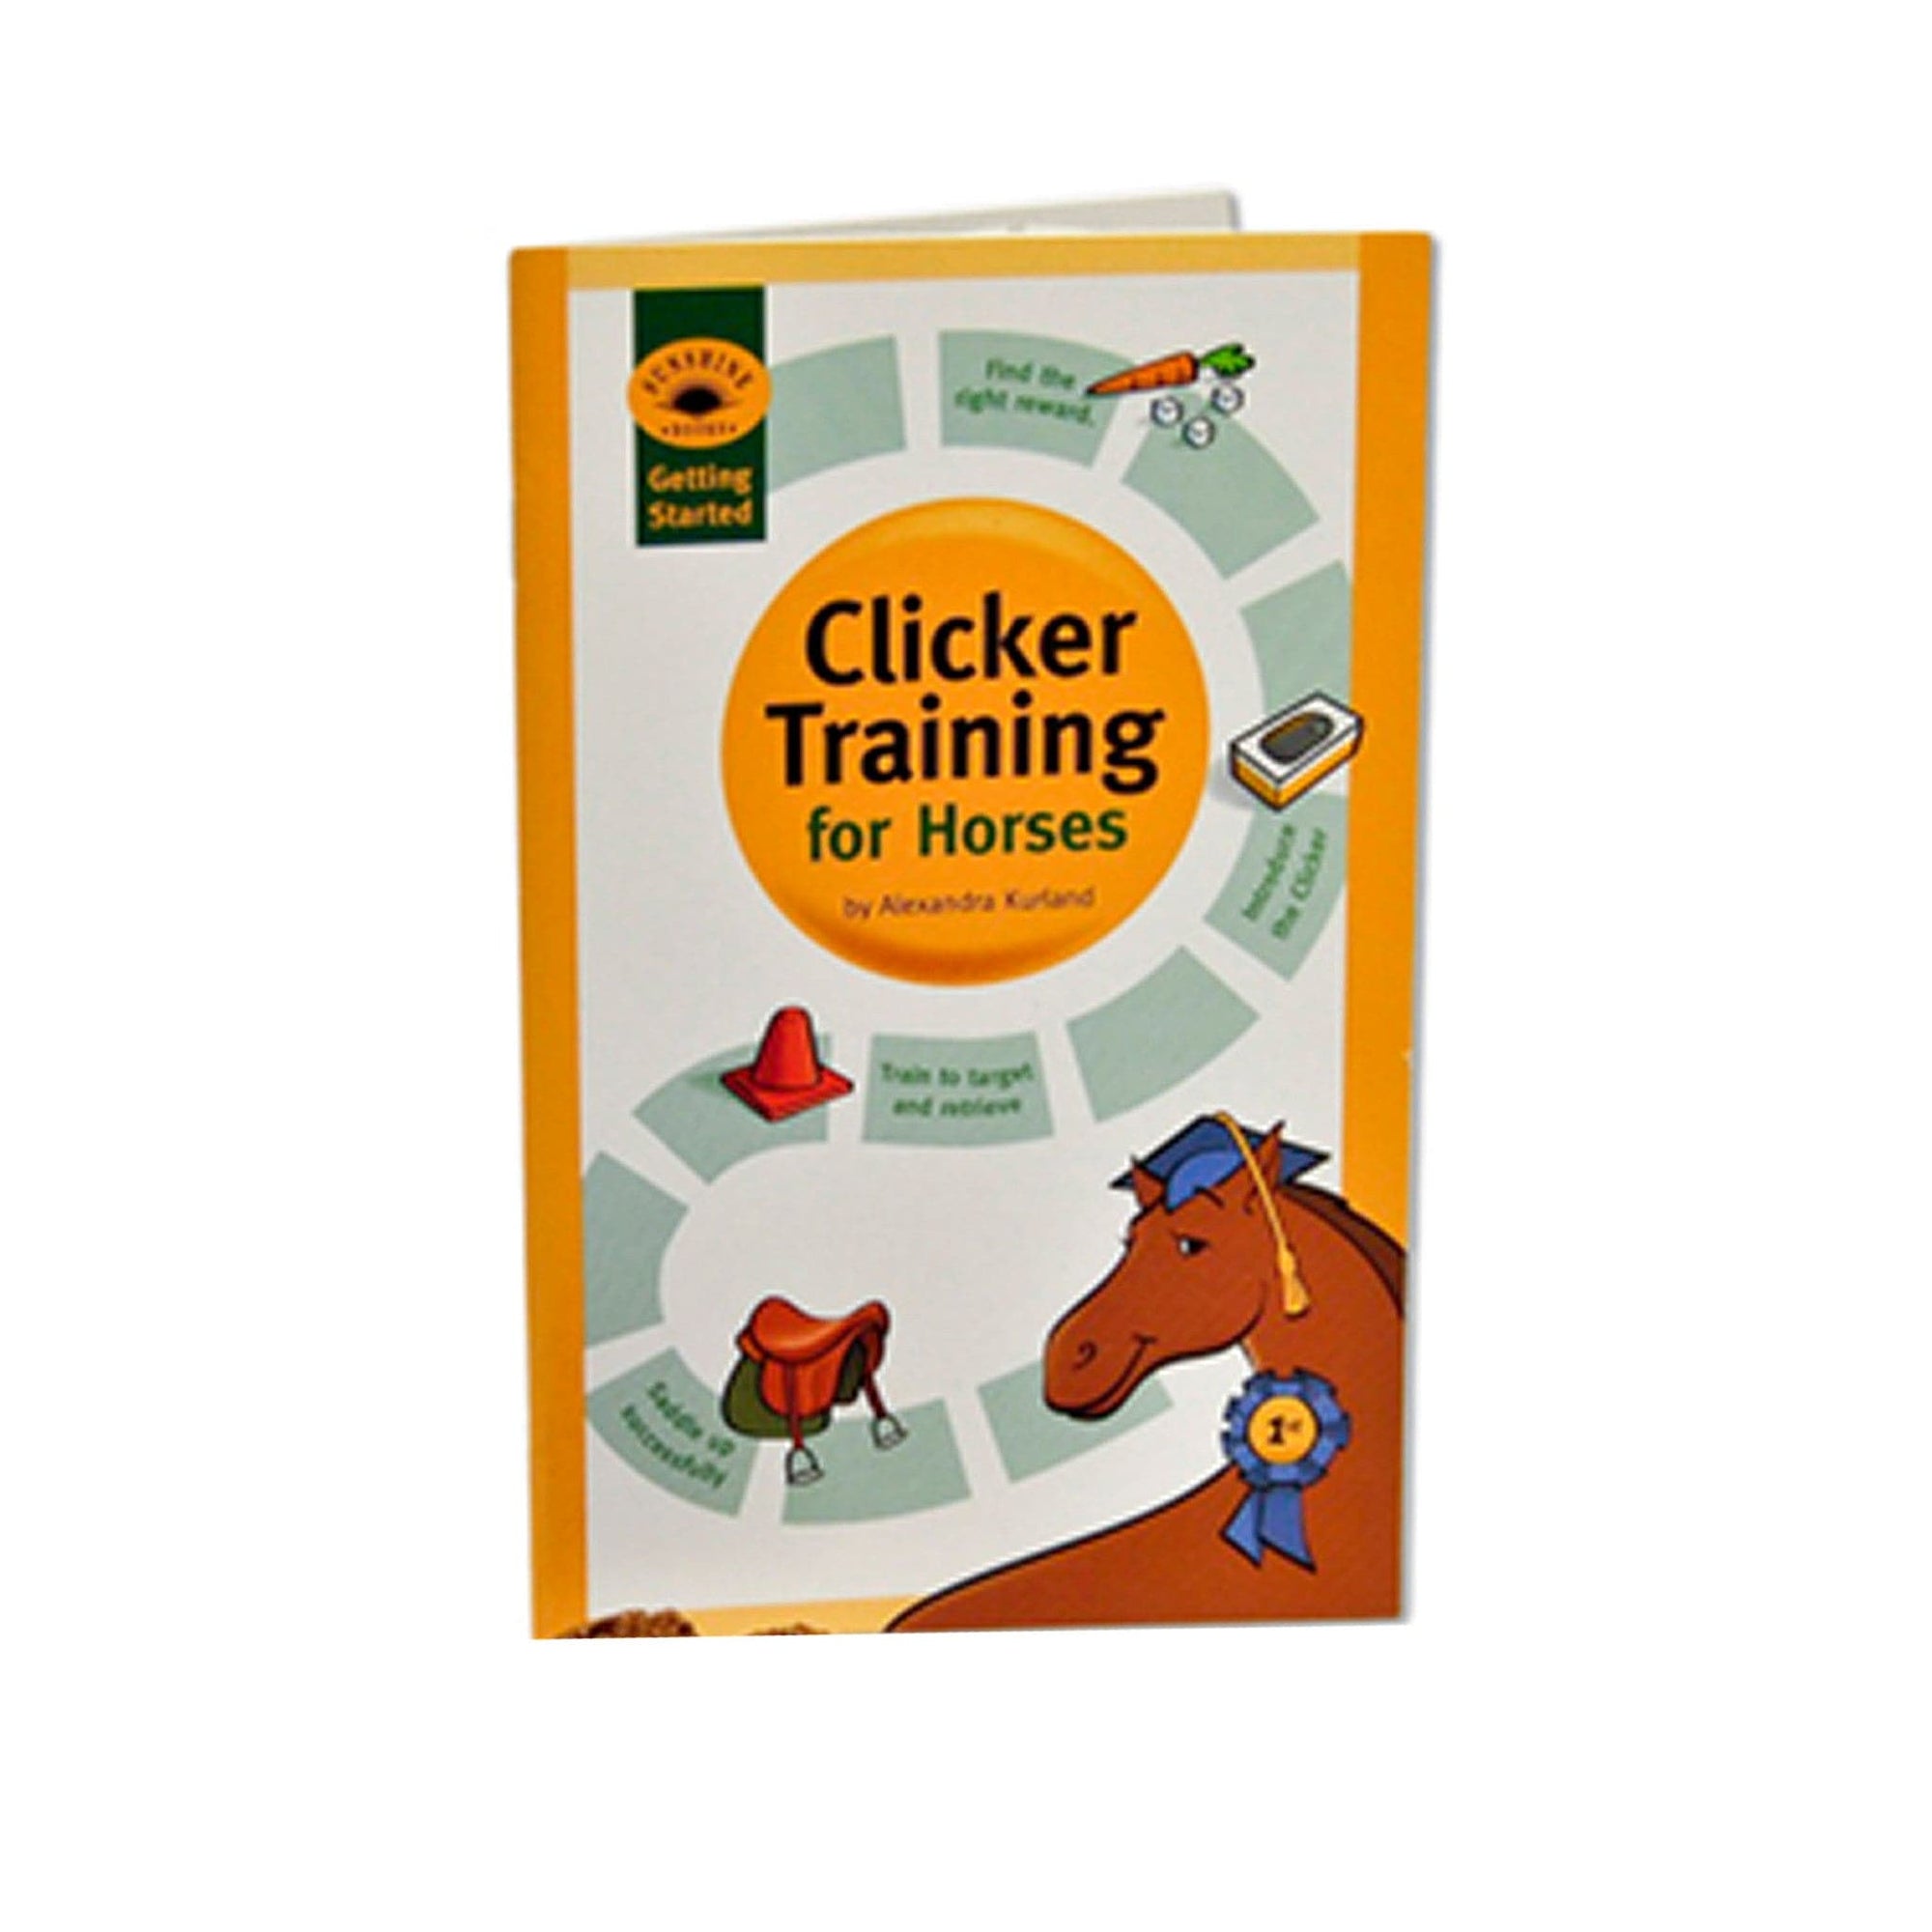 Getting Started: Clicker Training for Horses by Alexandra Kurland